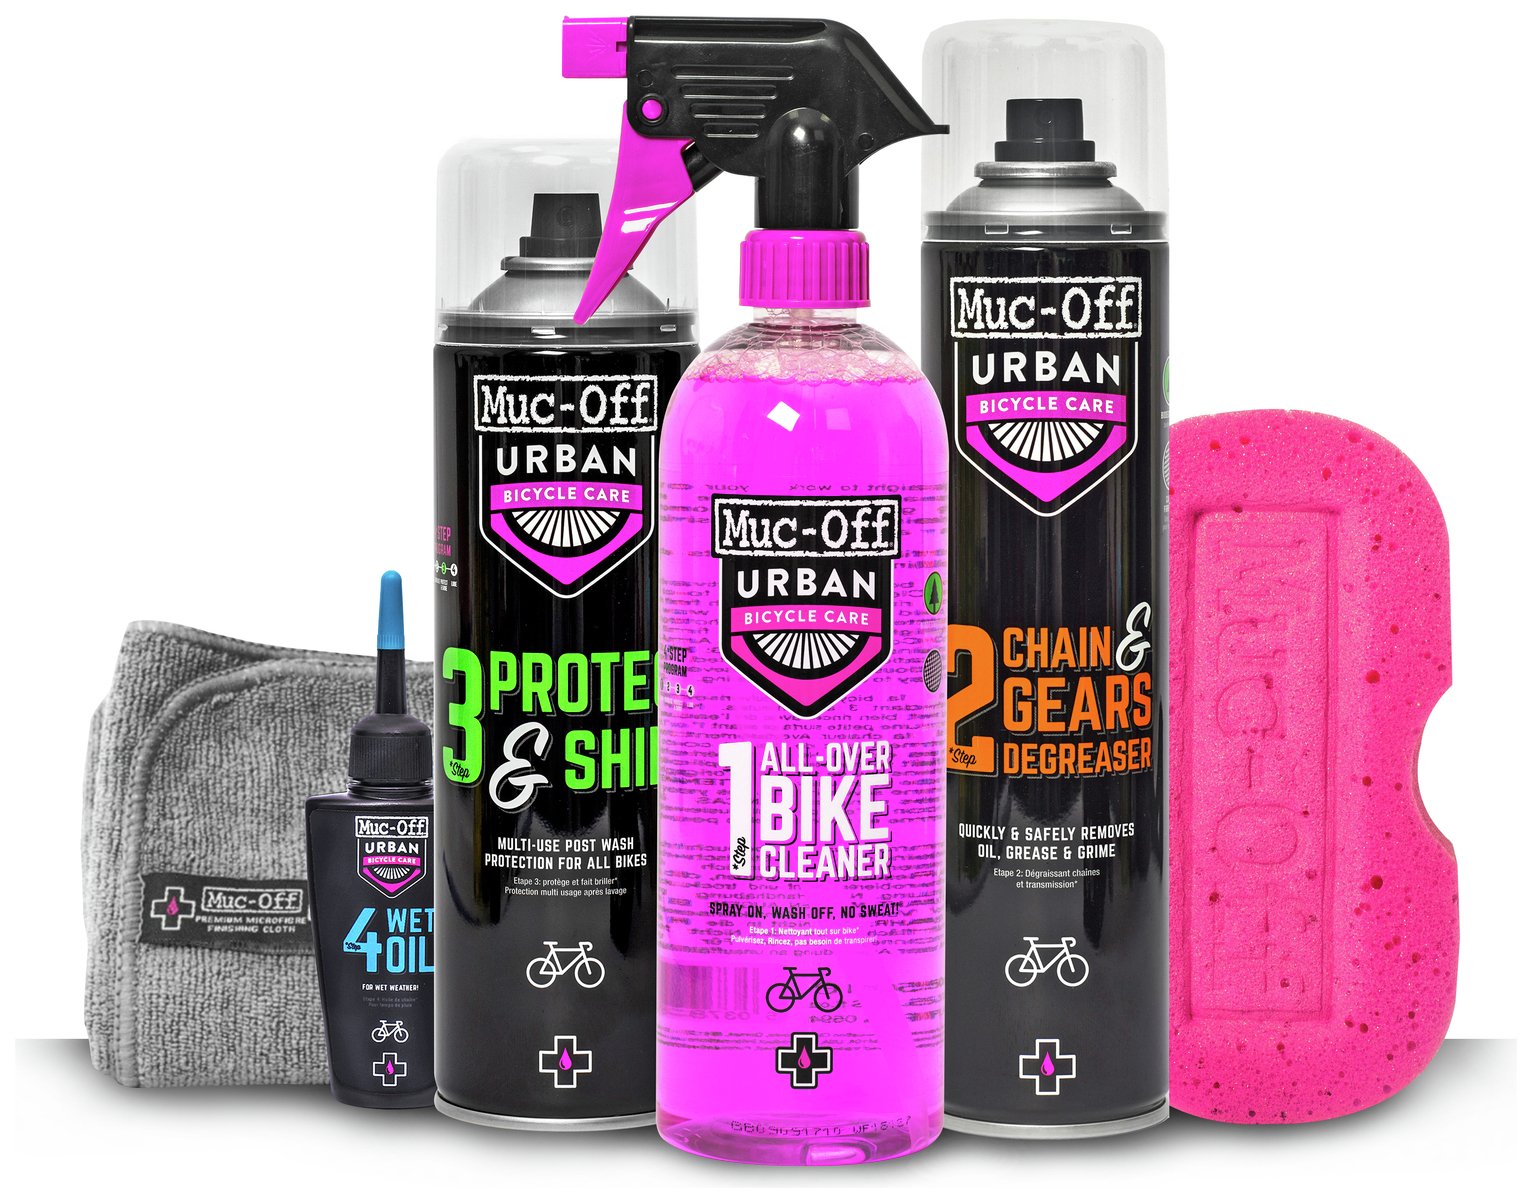 Muc-Off Exclusive Complete Urban Bike Cleaning Kit